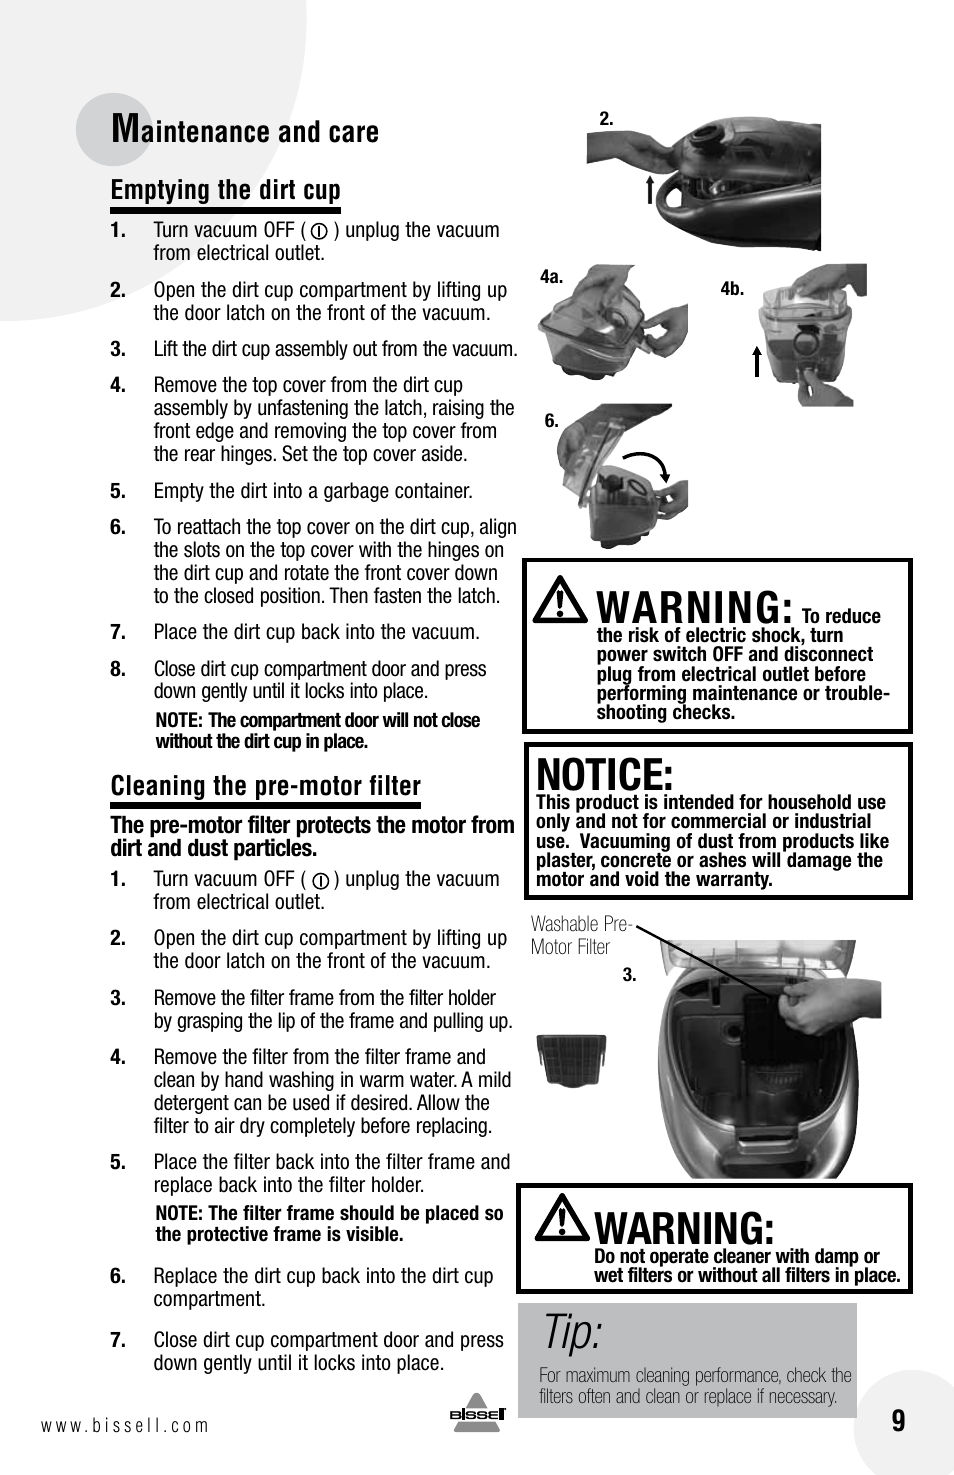 Warning, Notice, Aintenance and care | Bissell 33N7 User Manual | Page 9 / 16